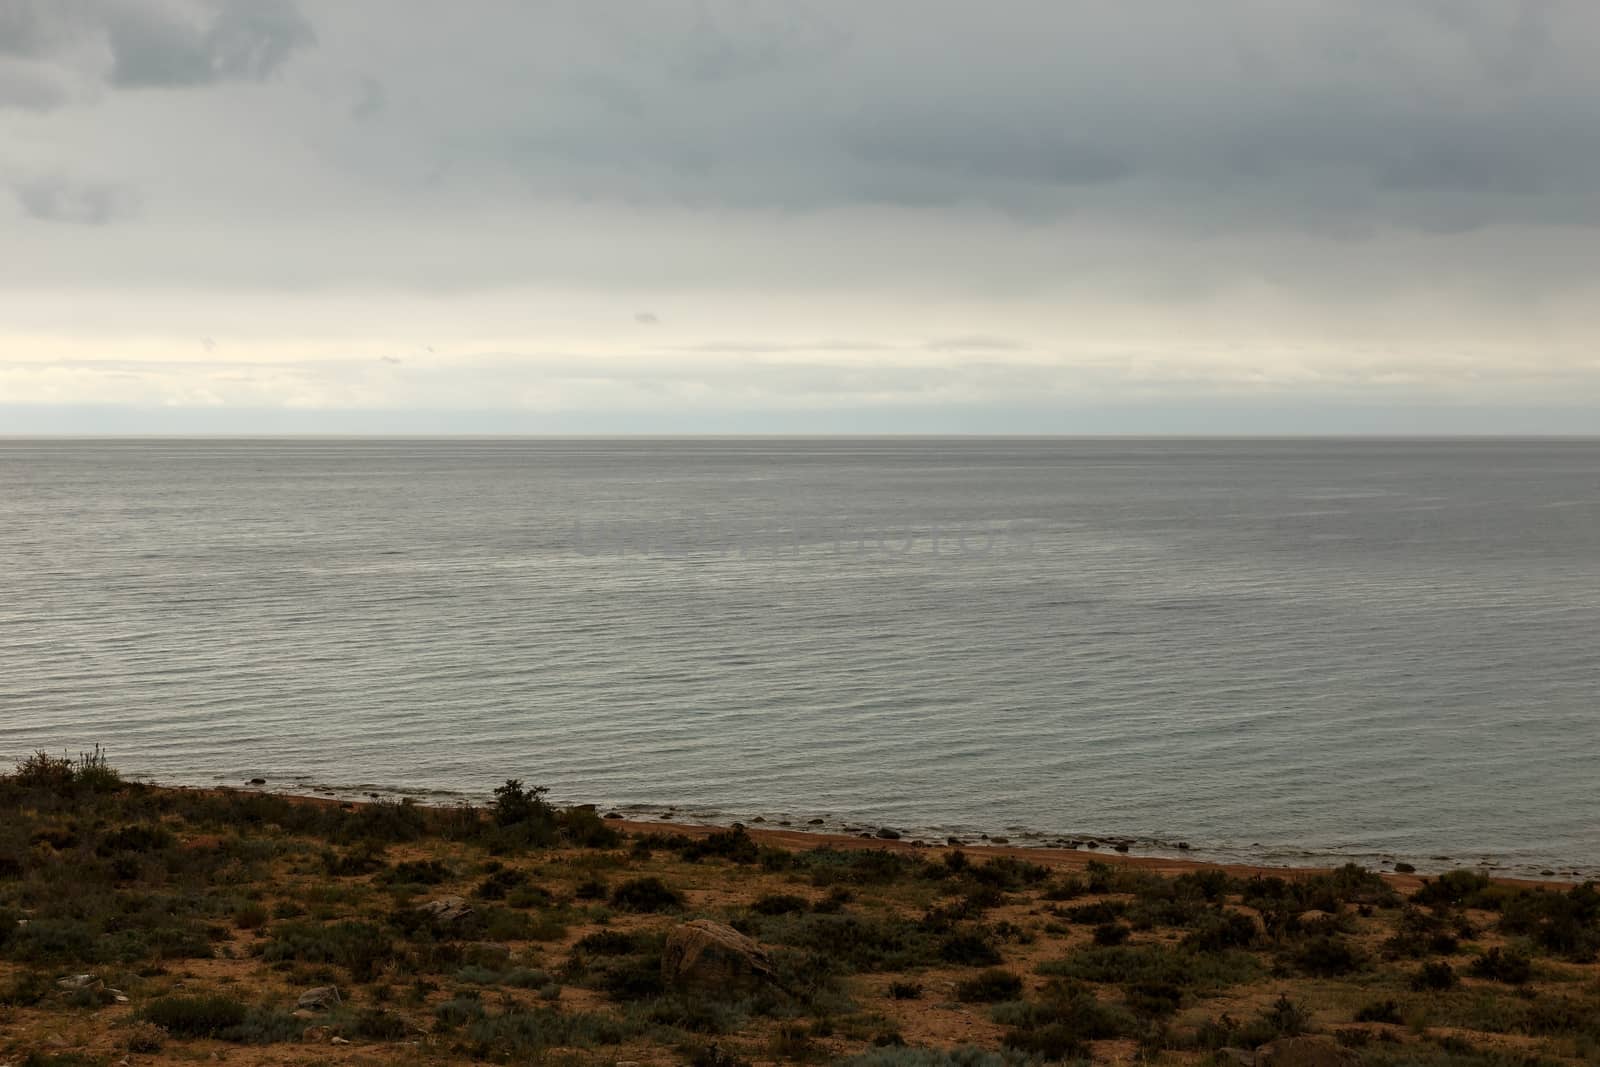 Issyk-Kul Lake, Kyrgyzstan. Stormy clouds over the lake.